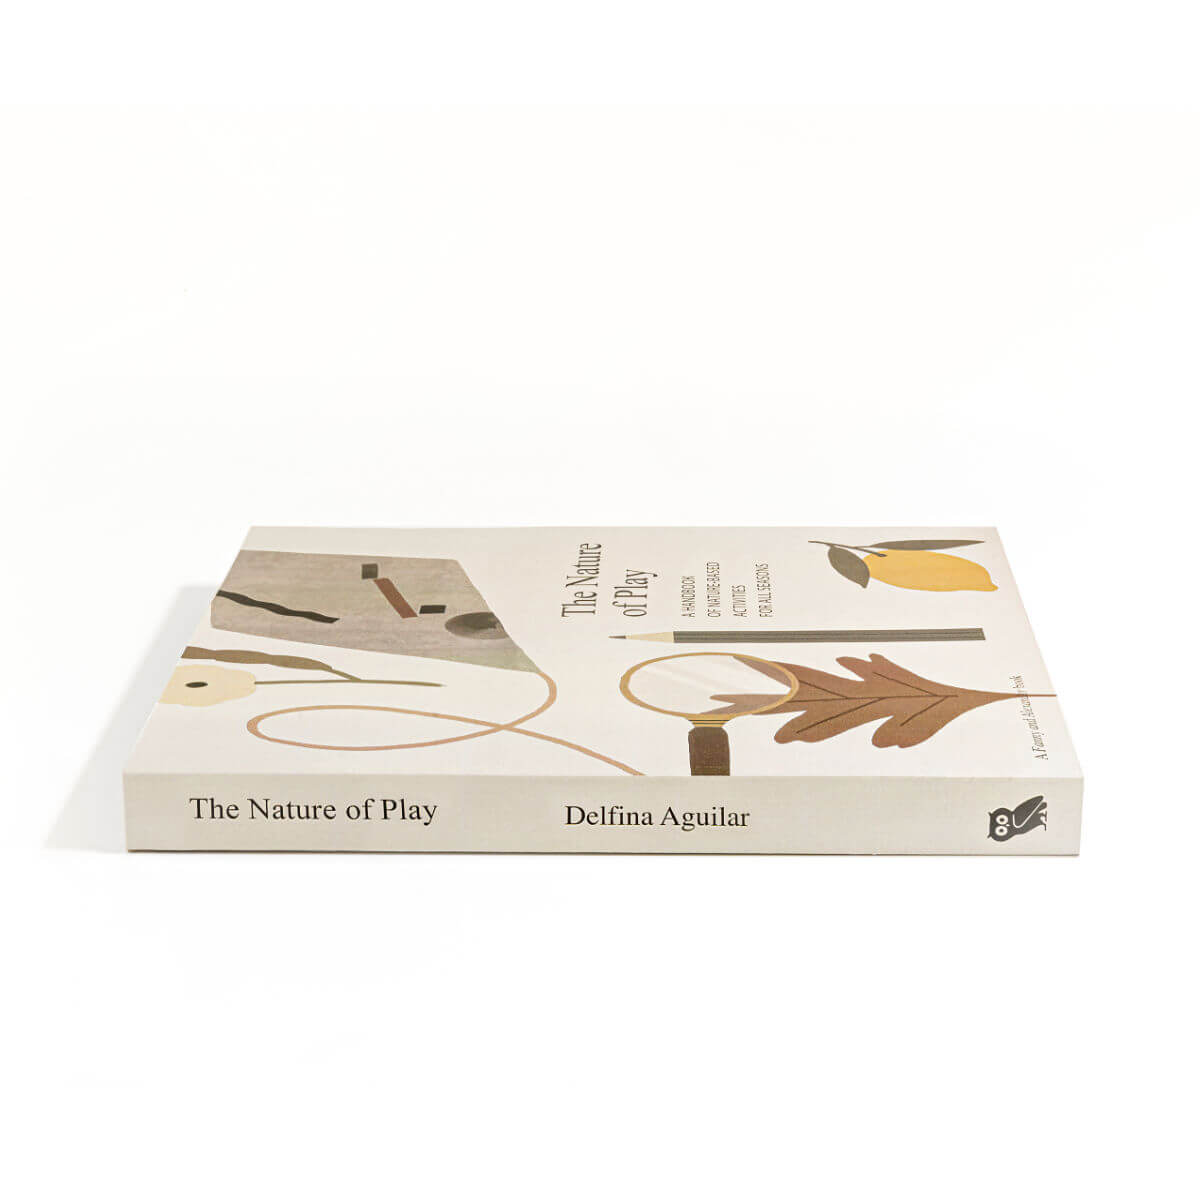 The nature of play book by Fanny and Alexander